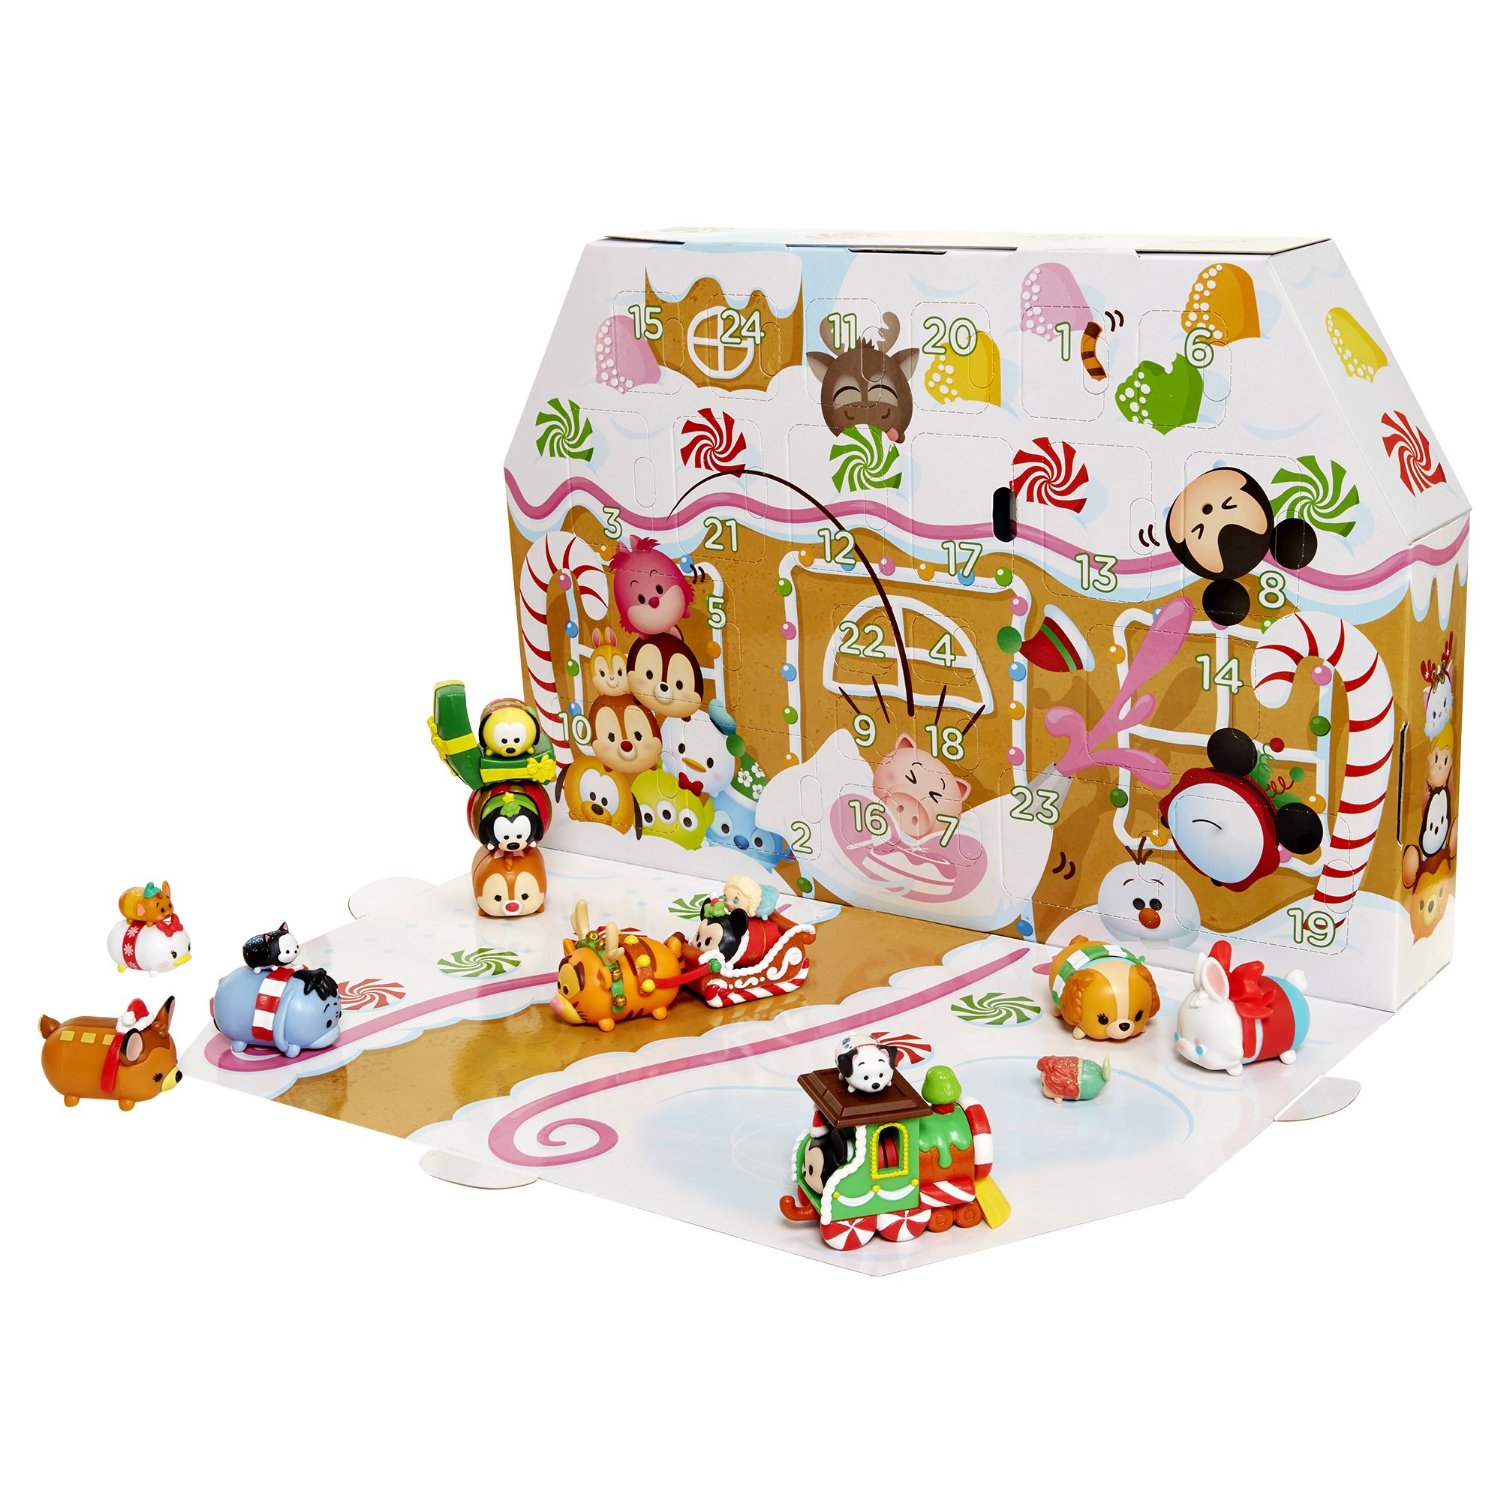 Stack Up your Count Down with the Tsum Tsum Advent Calendar